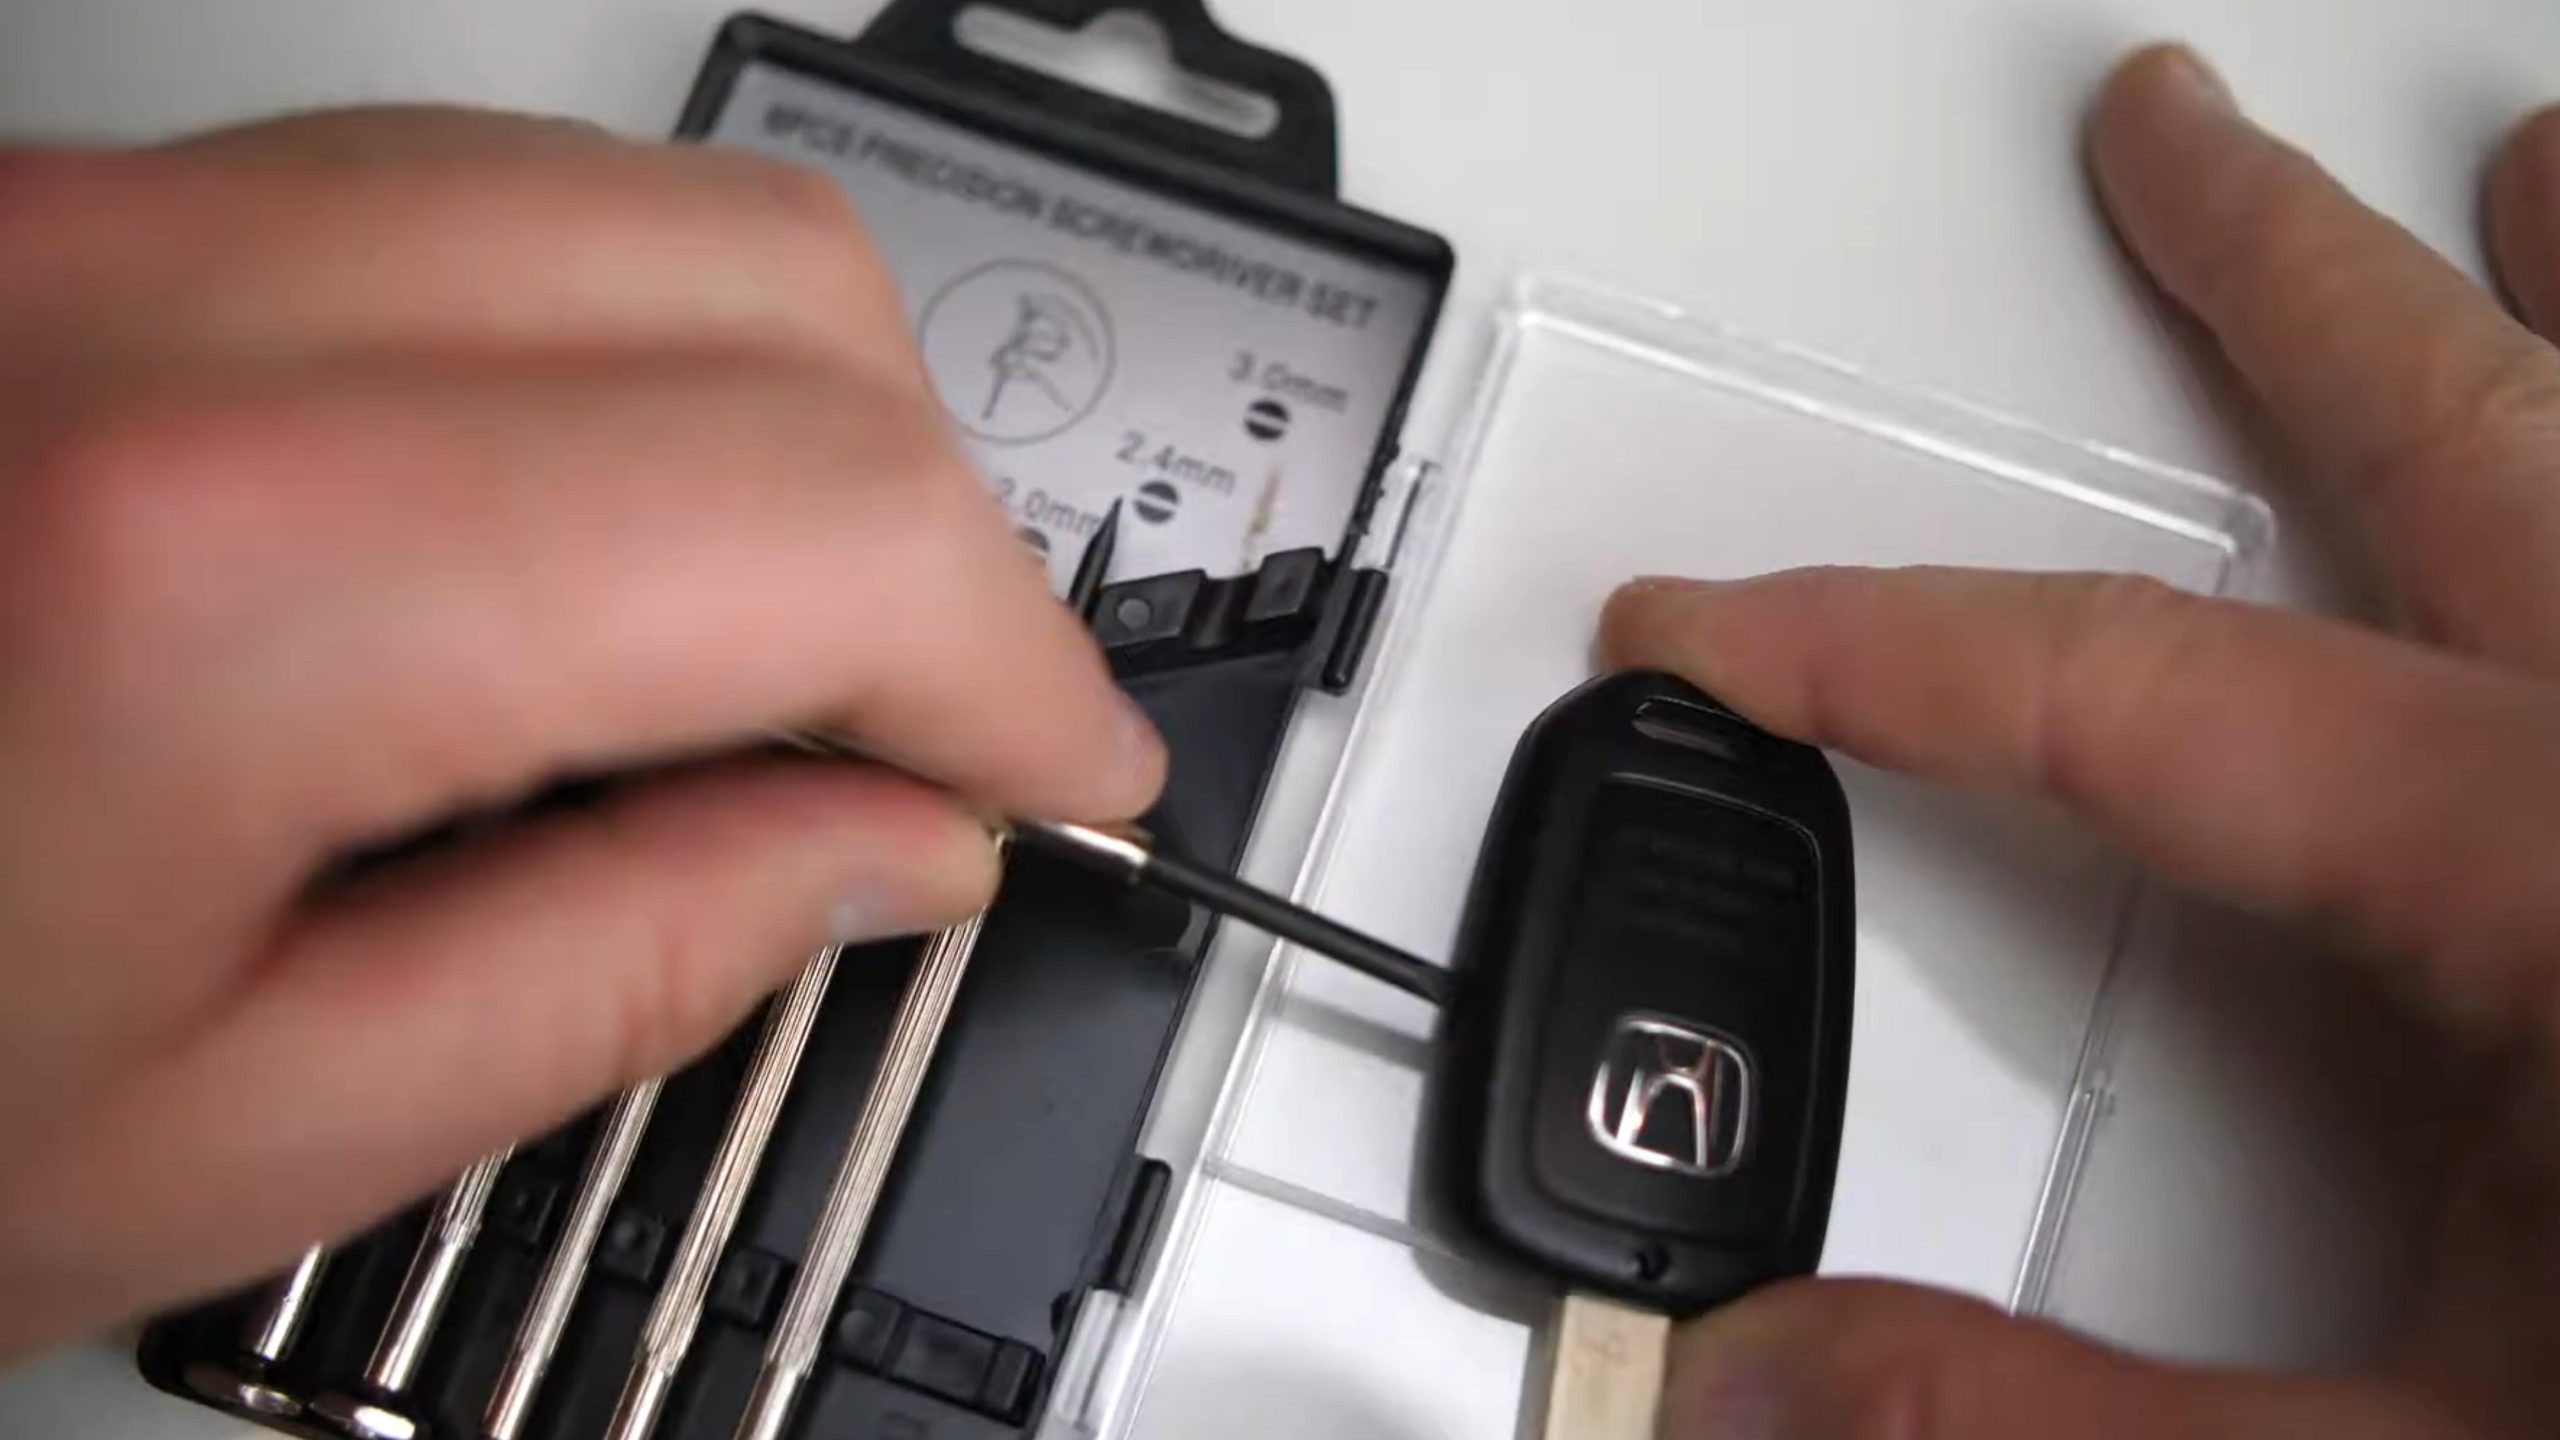 What Do I Do If Honda Key Fob Battery Is Low?